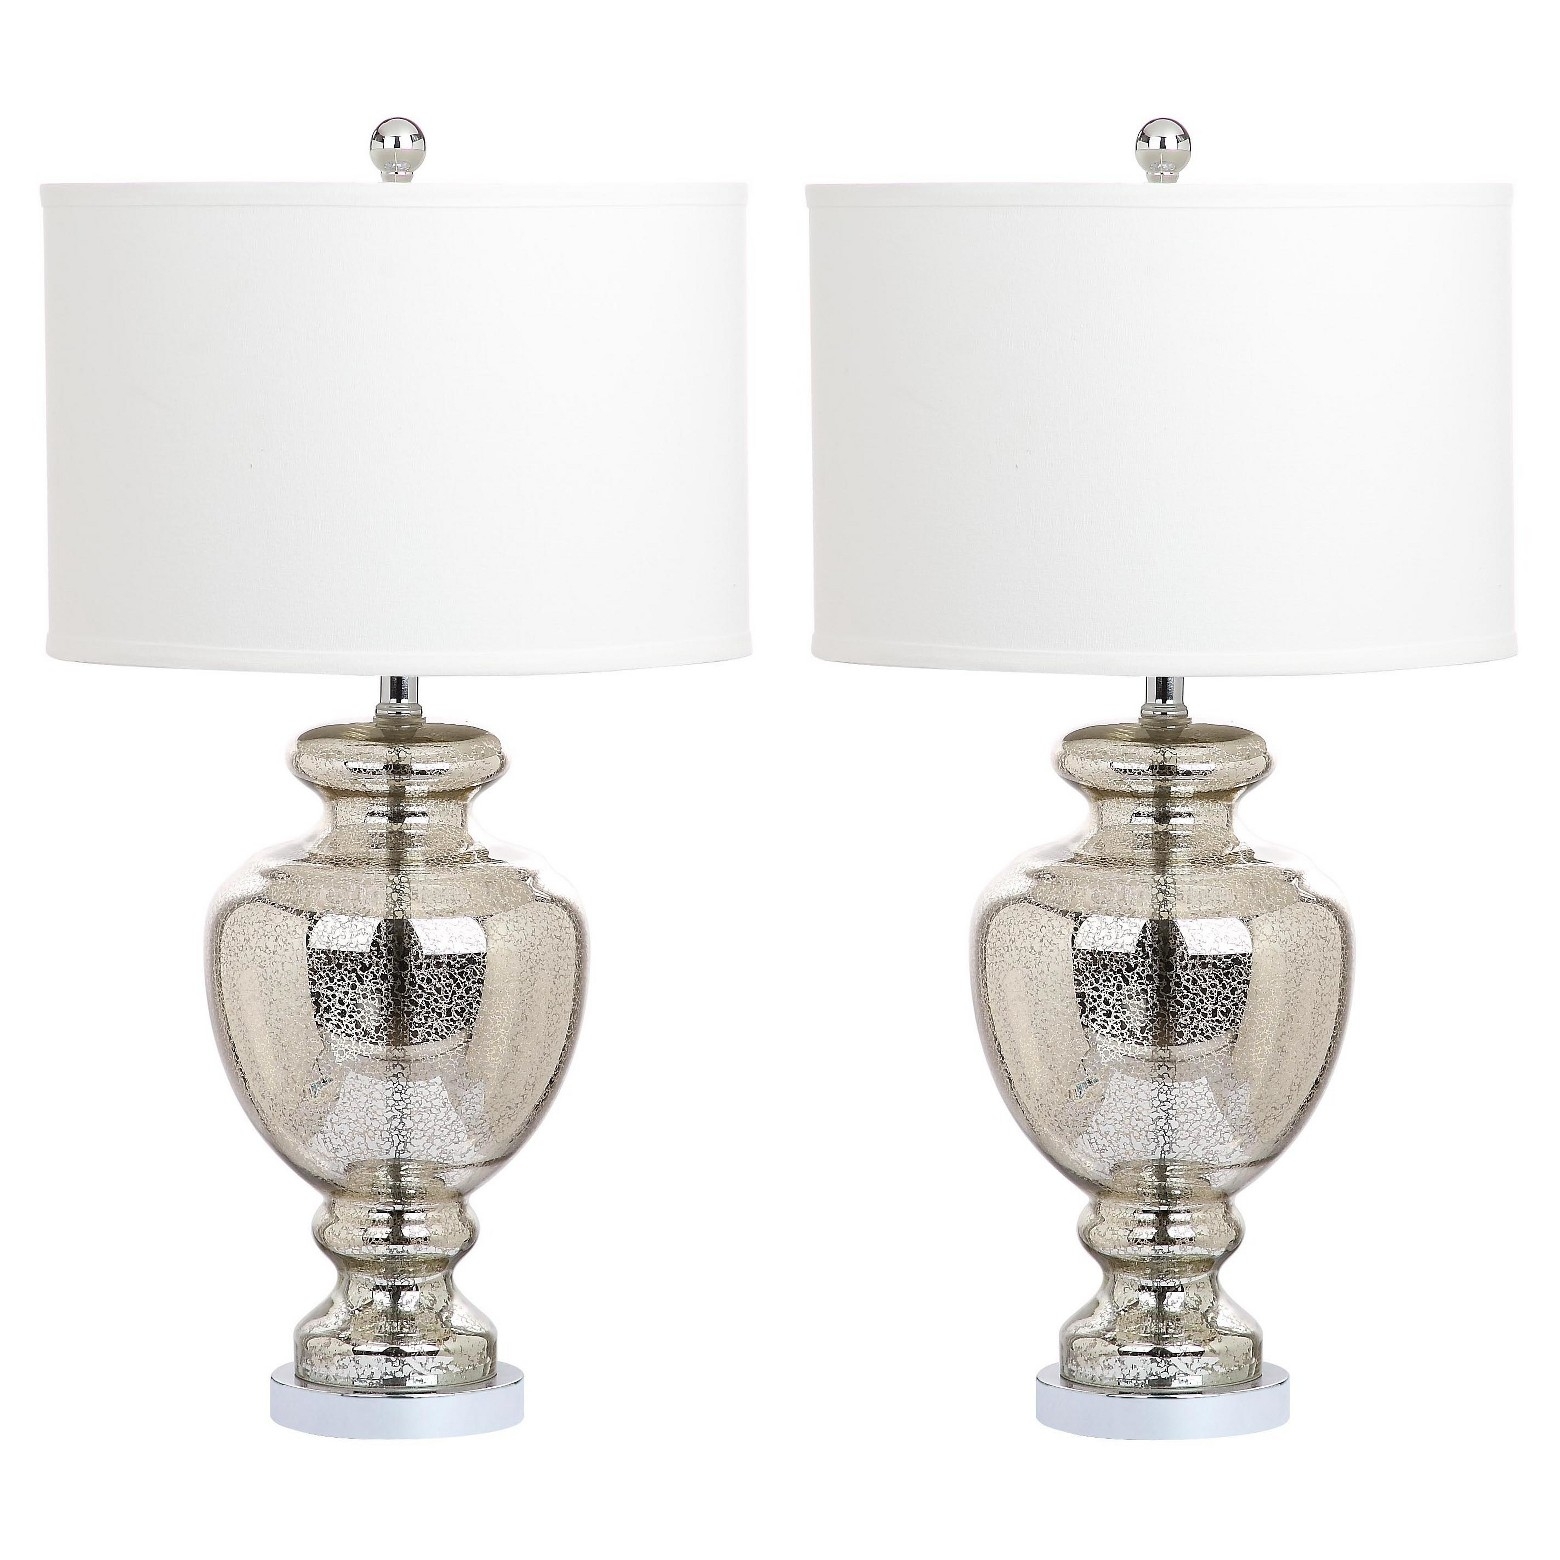 CLEAR GLASS TABLE LAMP - Set of 2 - Image 0